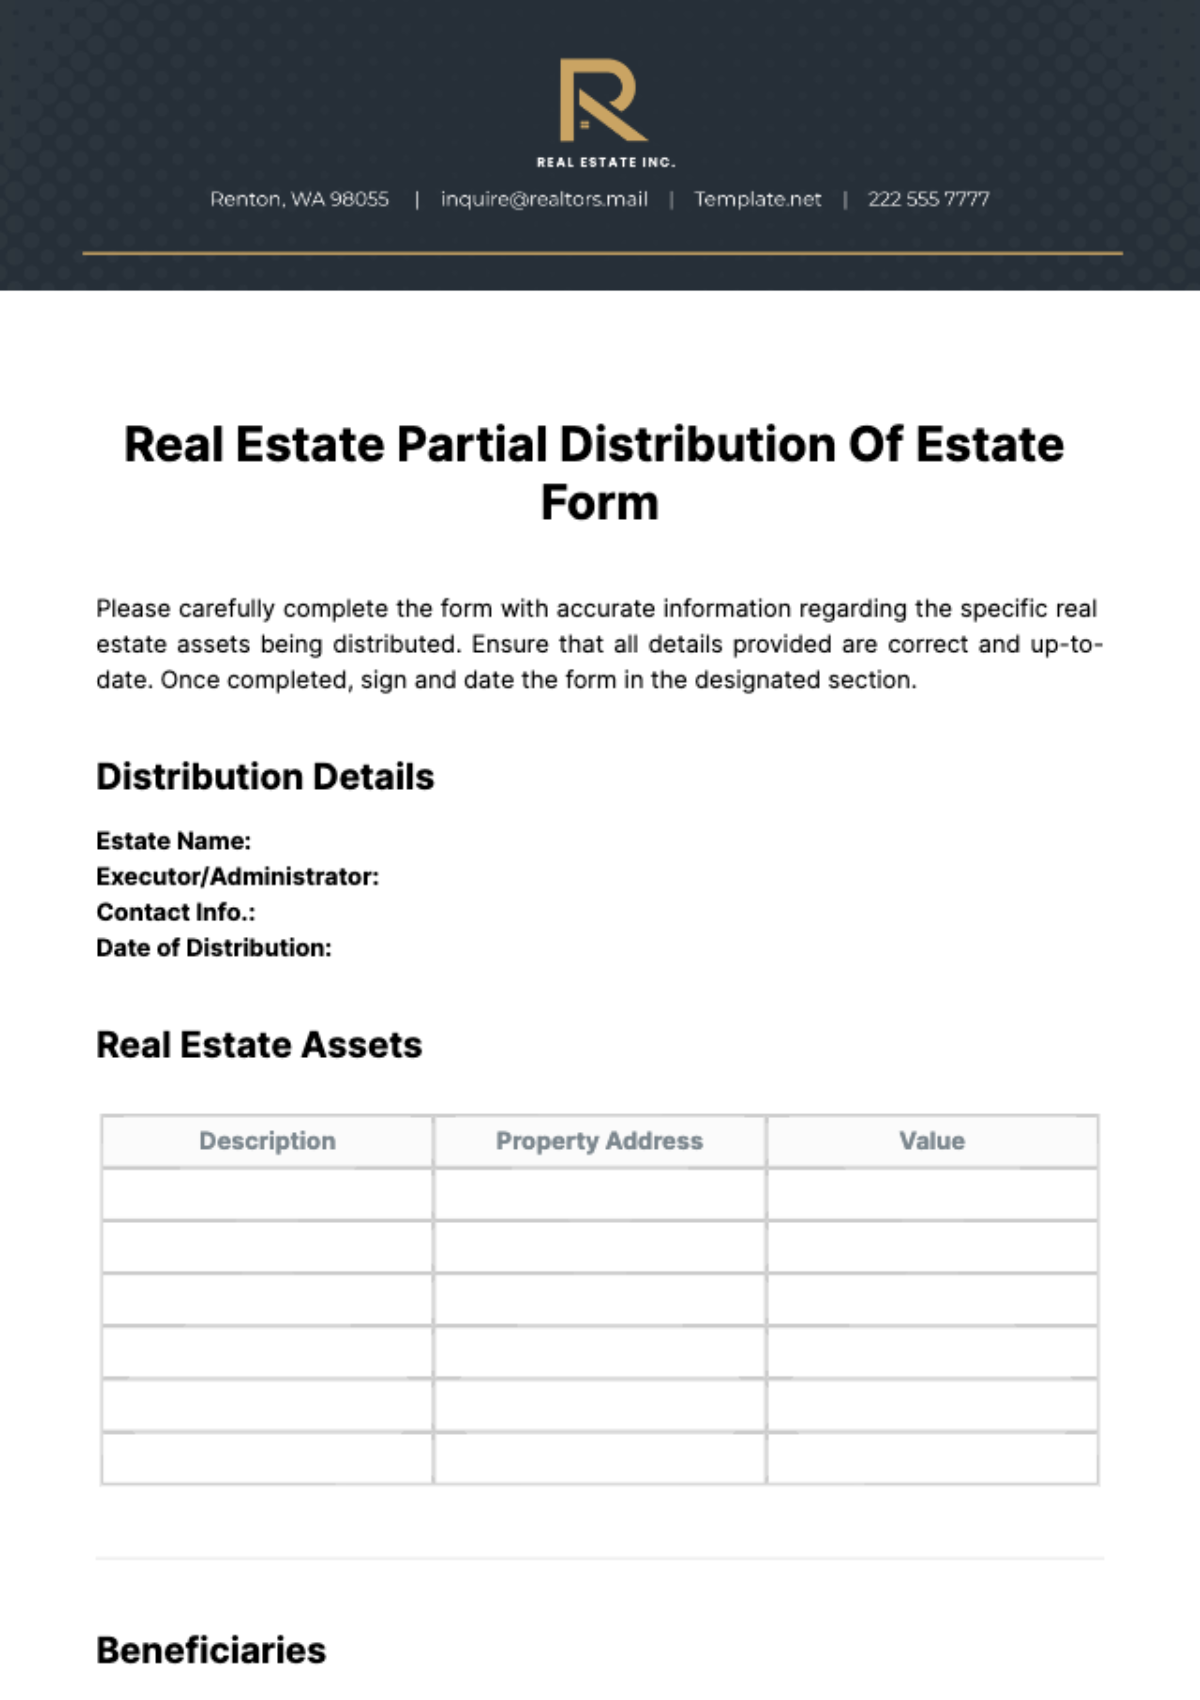 Real Estate Partial Distribution Of Estate Form Template